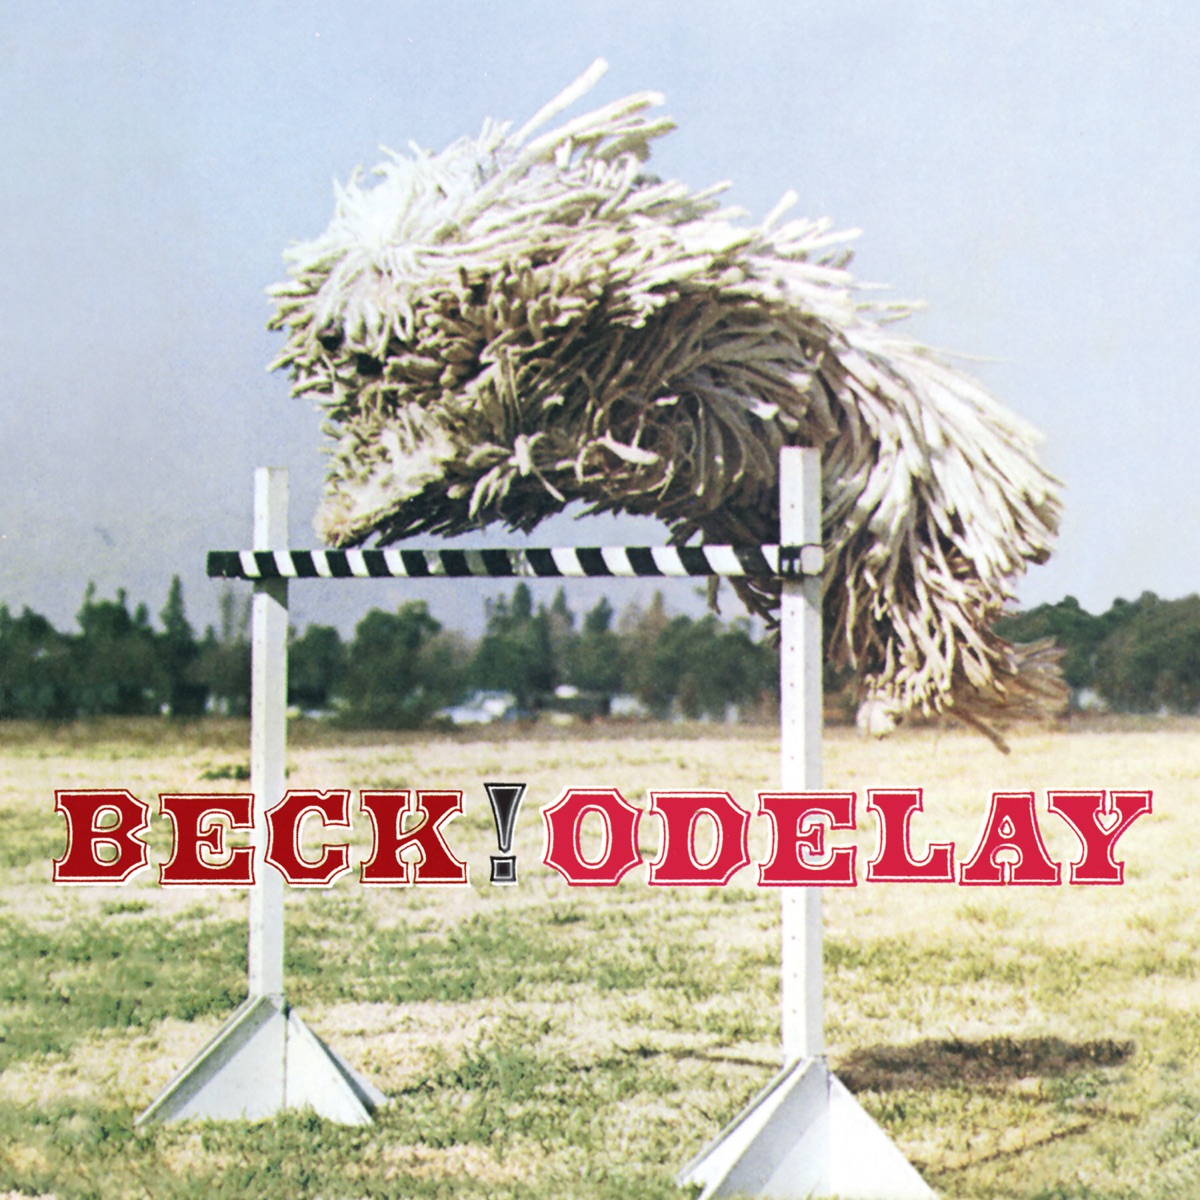 "Odelay" by Beck album cover